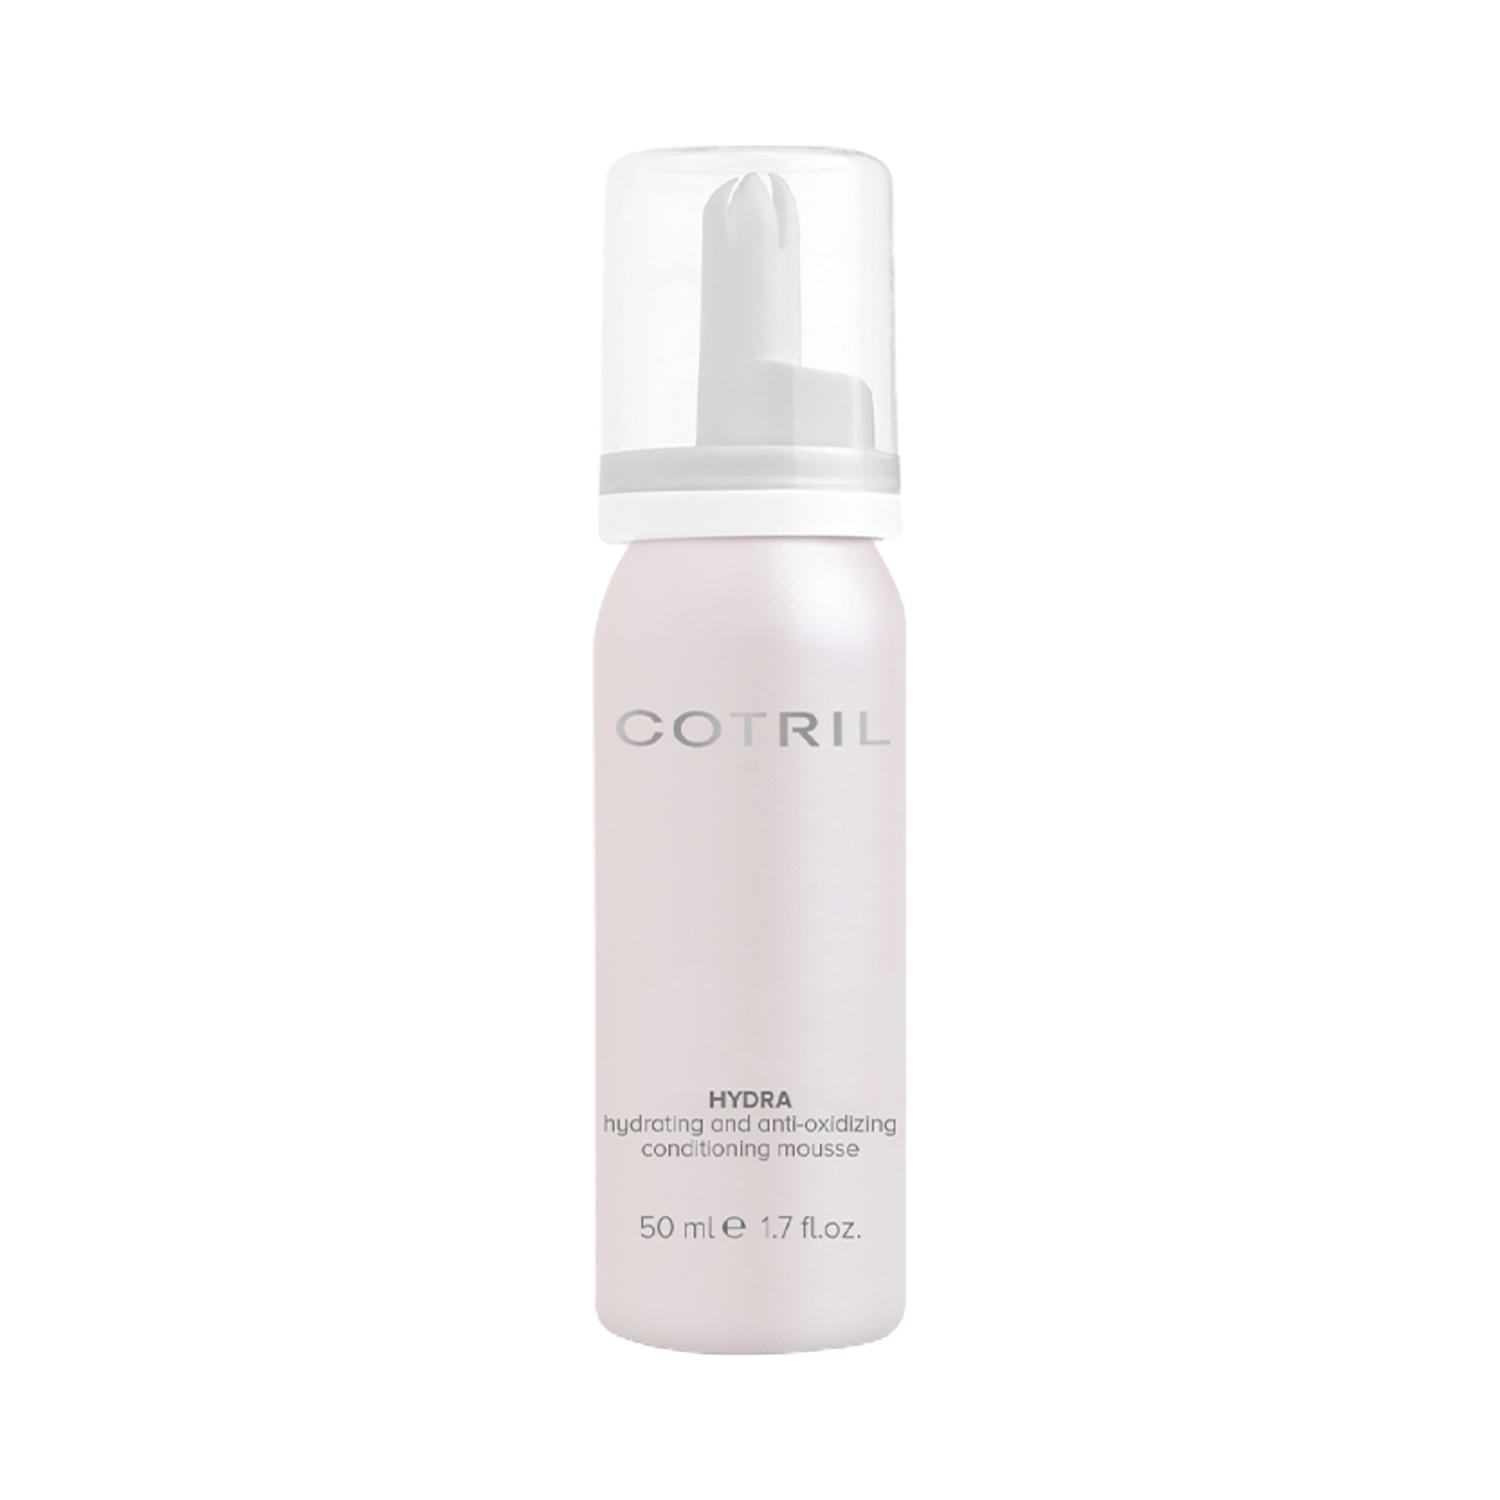 COTRIL | COTRIL Hydra Mousse Hair Cream (50 ml)